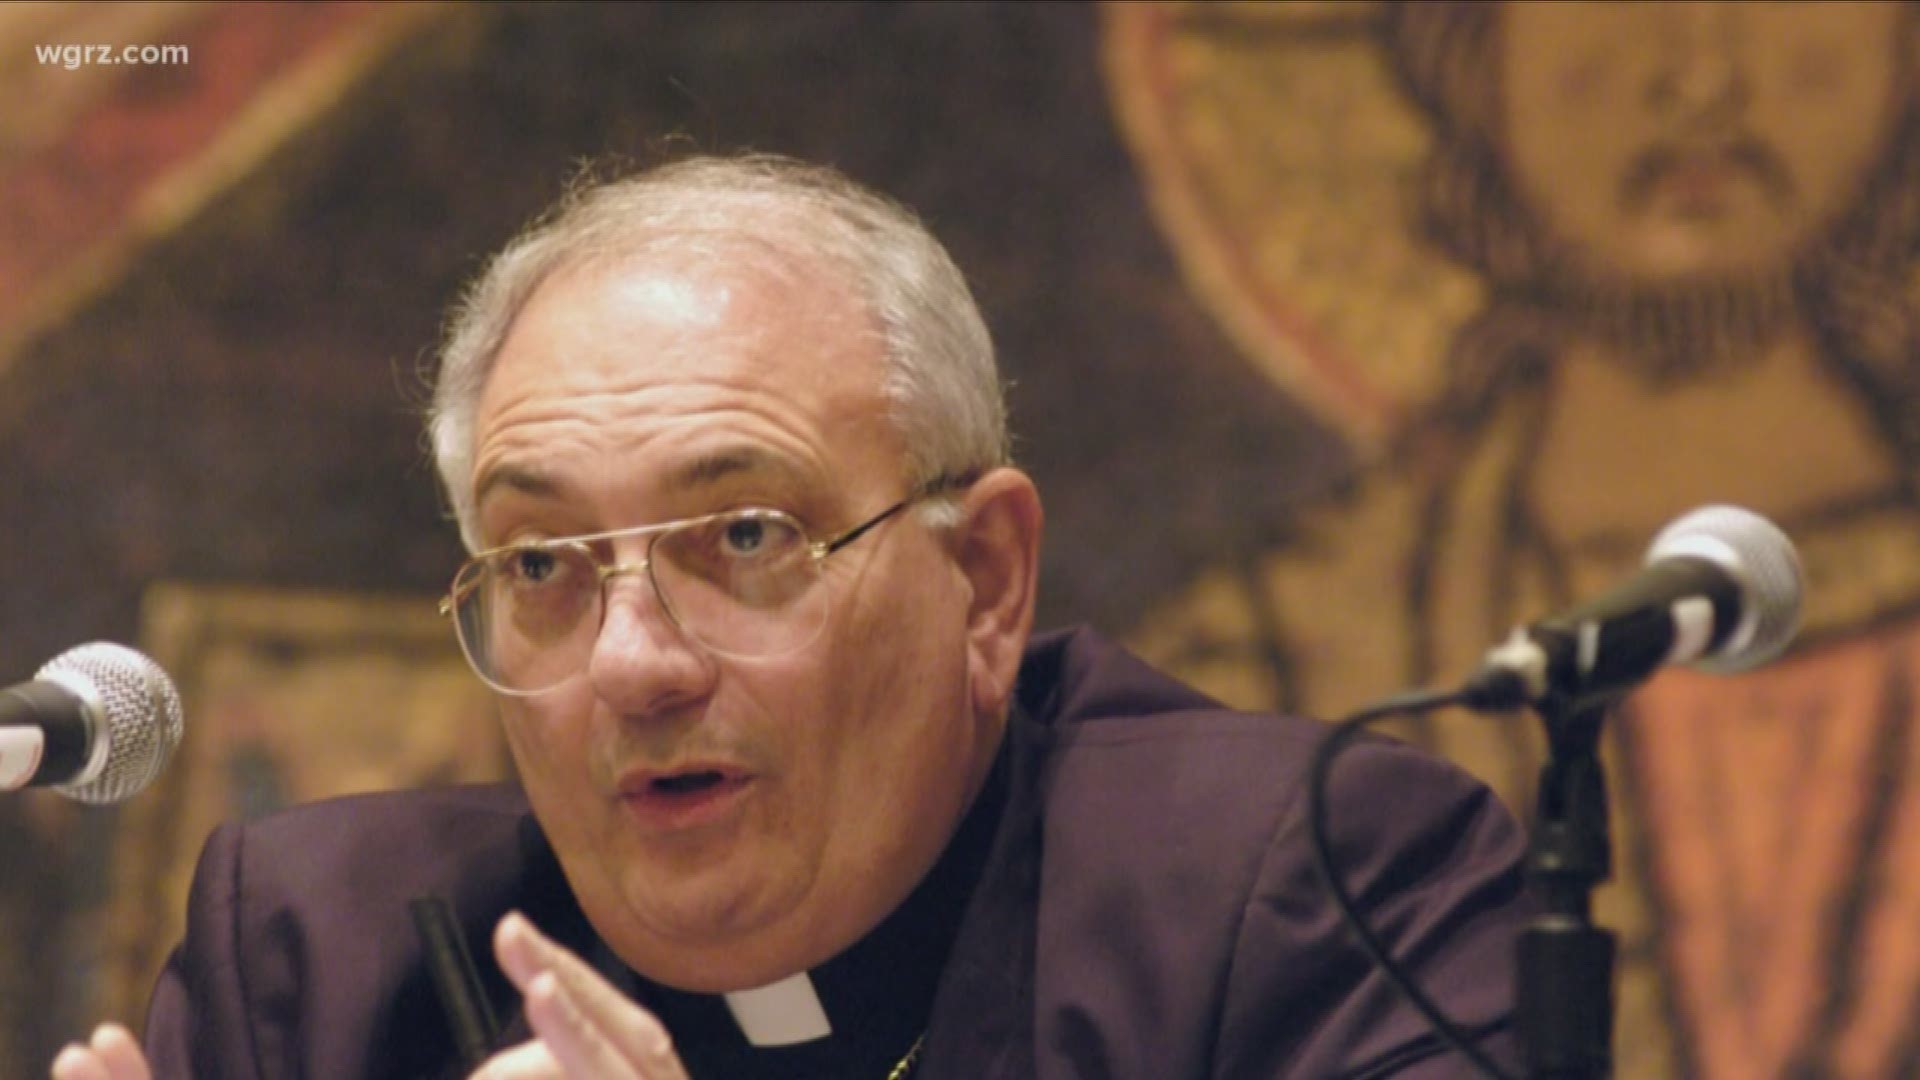 An accusation of sexual abuse by a Catholic cleric surfaced as Bishop Nicholas DiMarzio was conduction his investigation of the Buffalo Diocese.